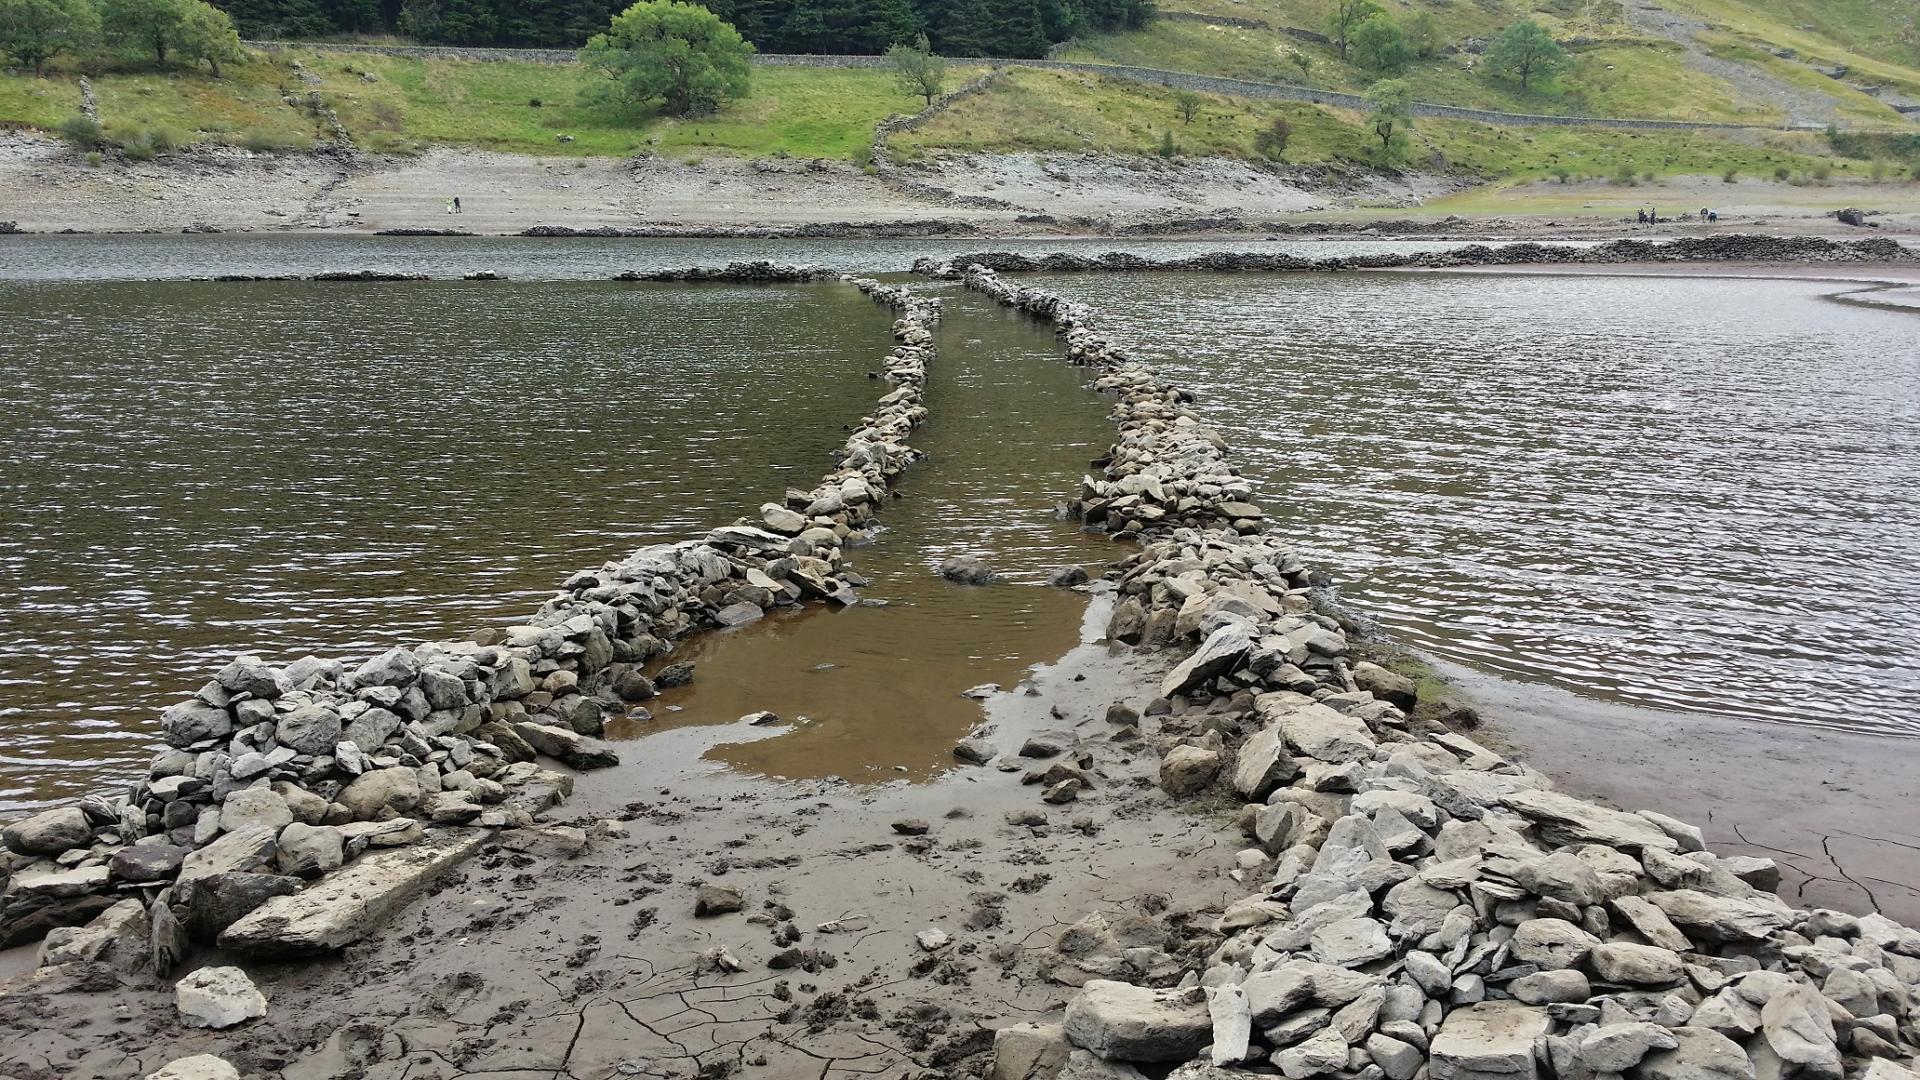 Man-Made Attractions in Cumbria: a drowned village exposed in drought